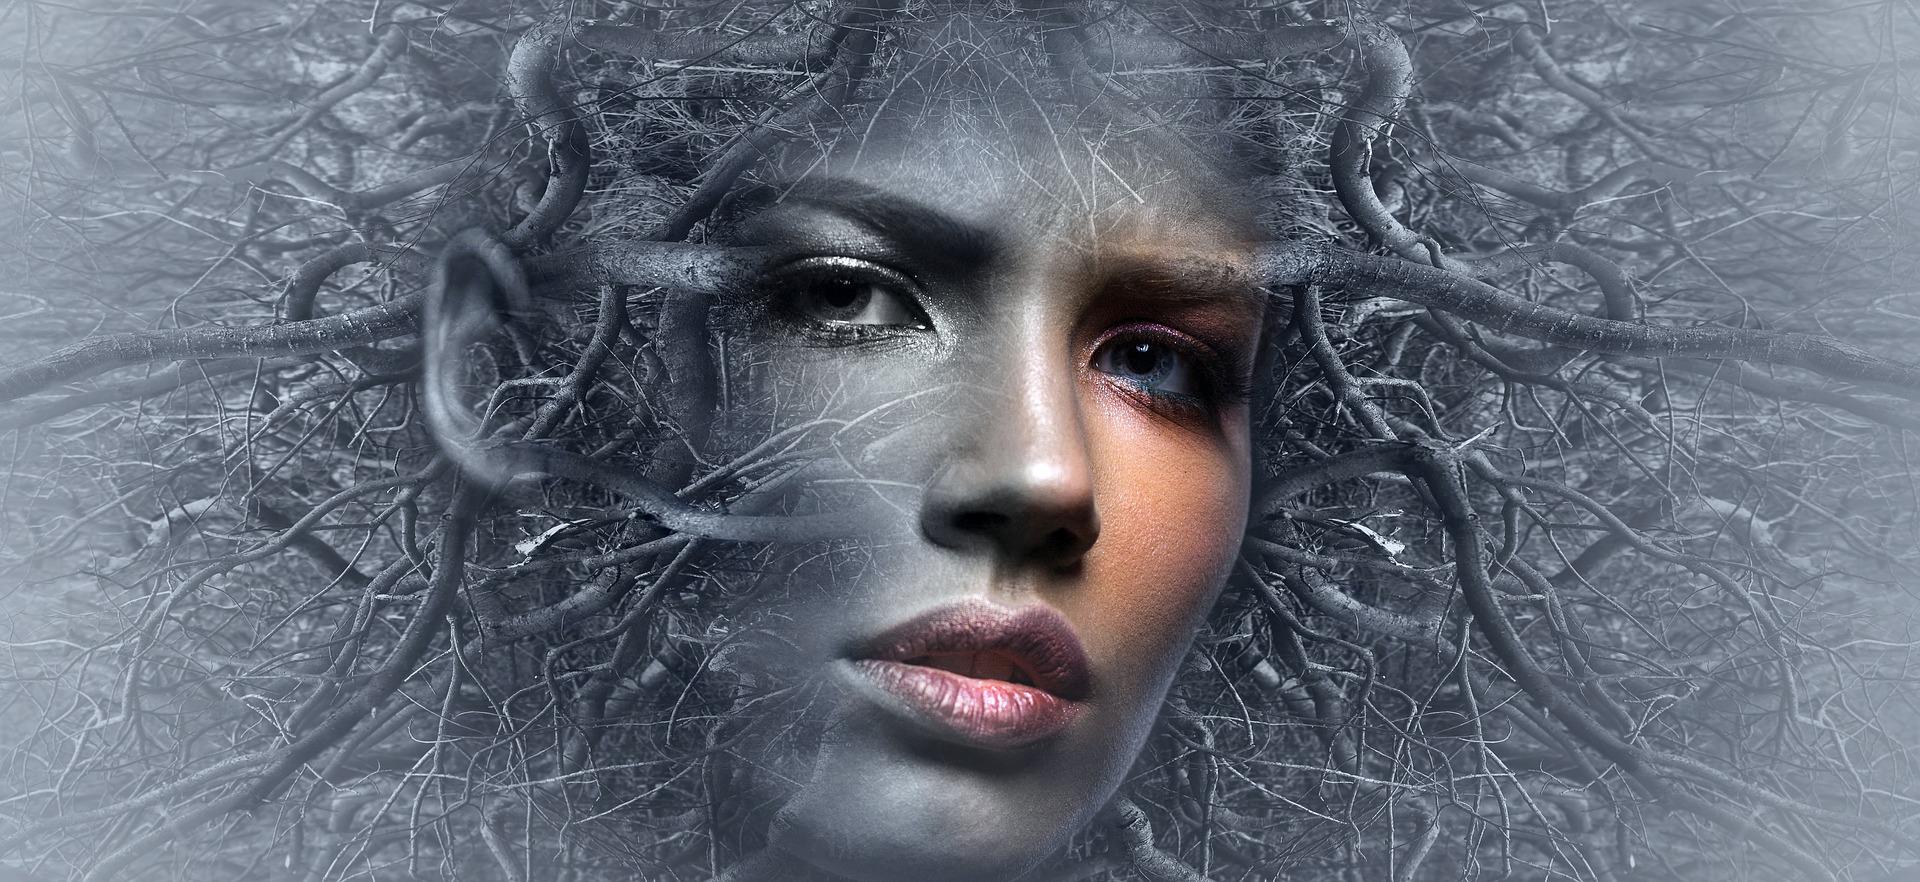 A surreal image of a serious woman's face with branches in grey appearing to be emerging from her mind